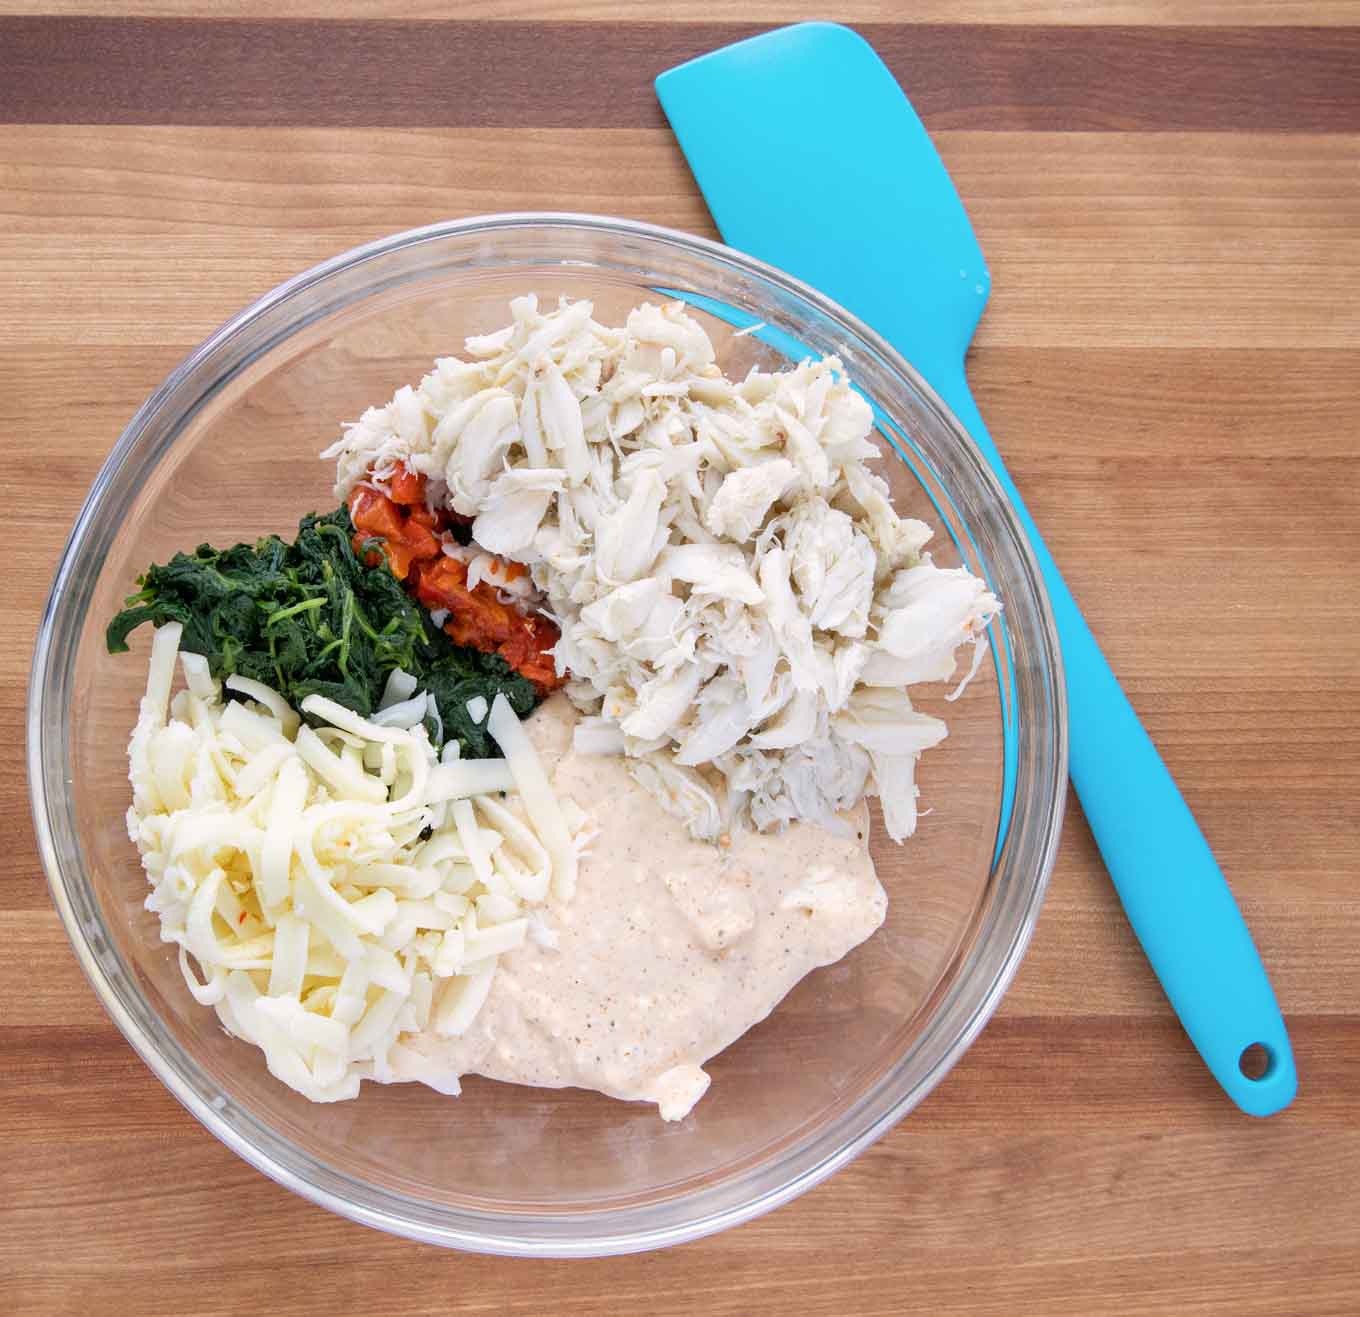 ingredients to make crabmeat and cheese stuffing in a glass bowl with a blue rubber spatula next to it